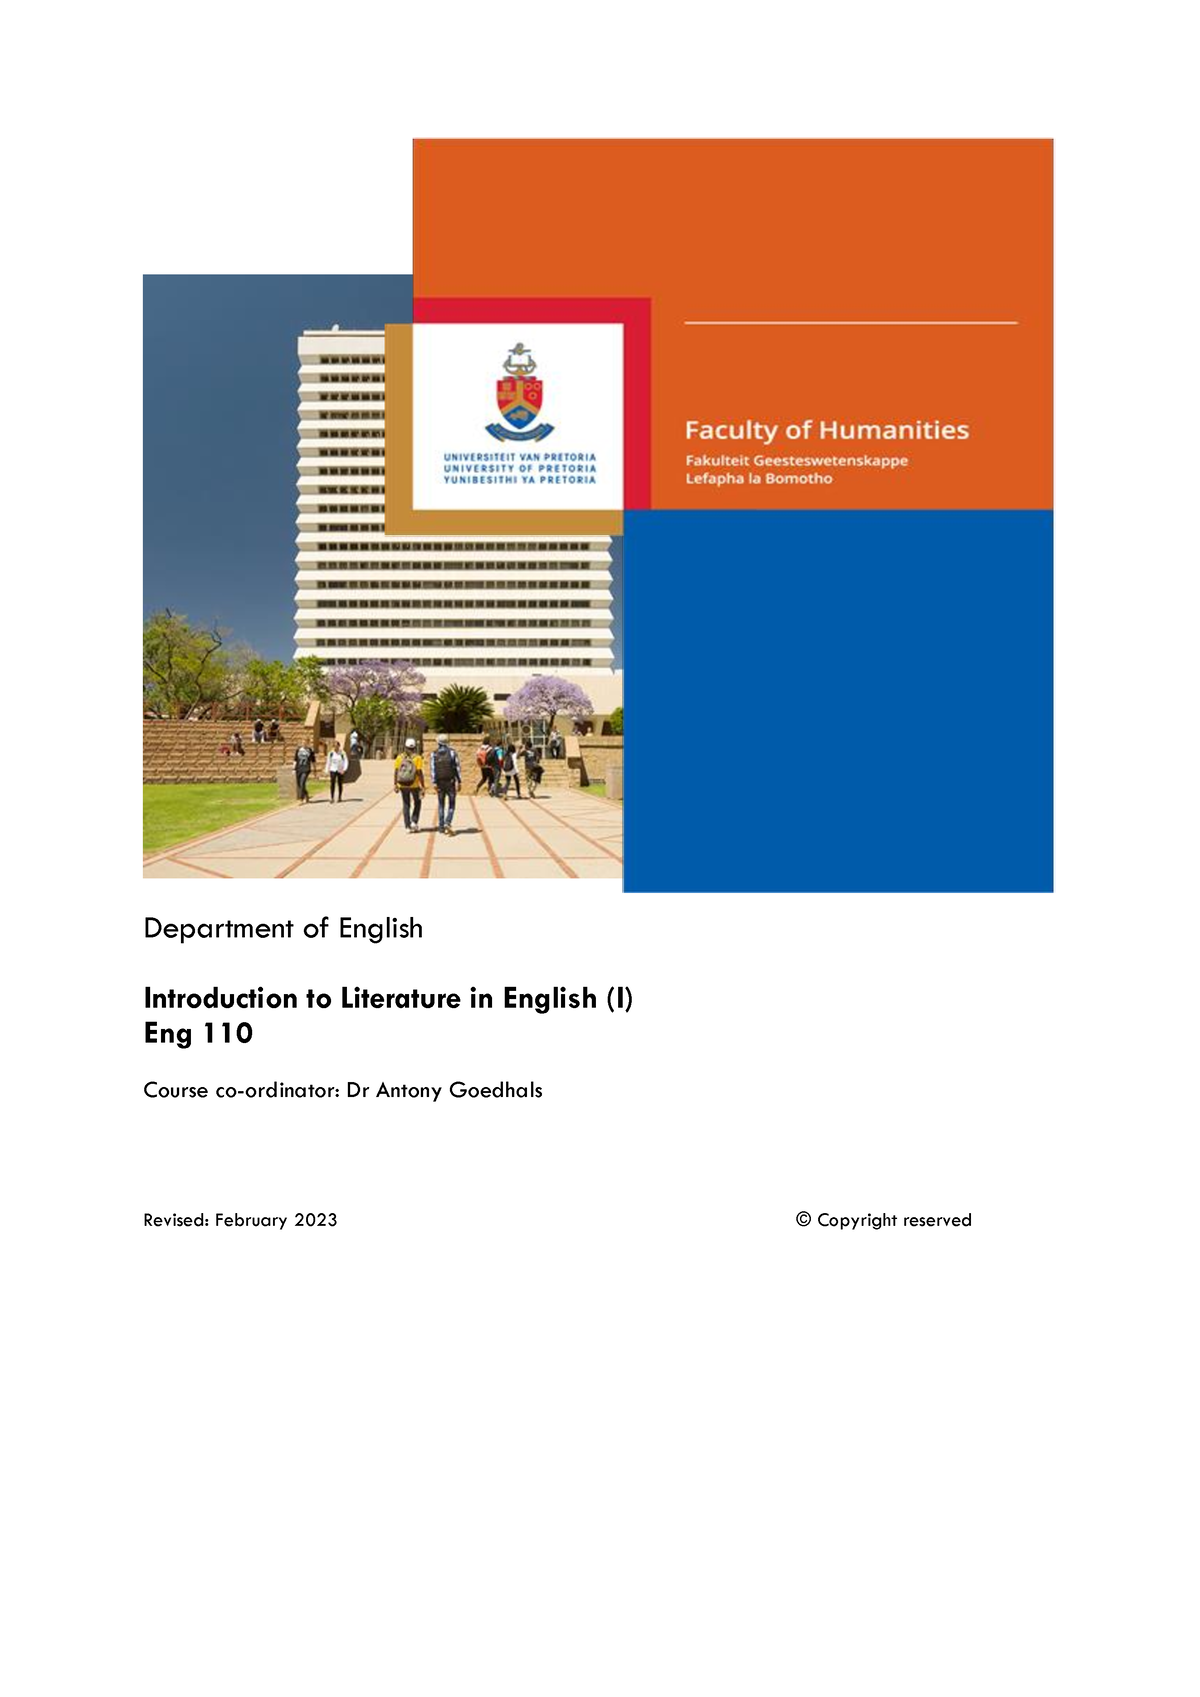 eng-110-study-guide-updated-feb-17-2023-department-of-english